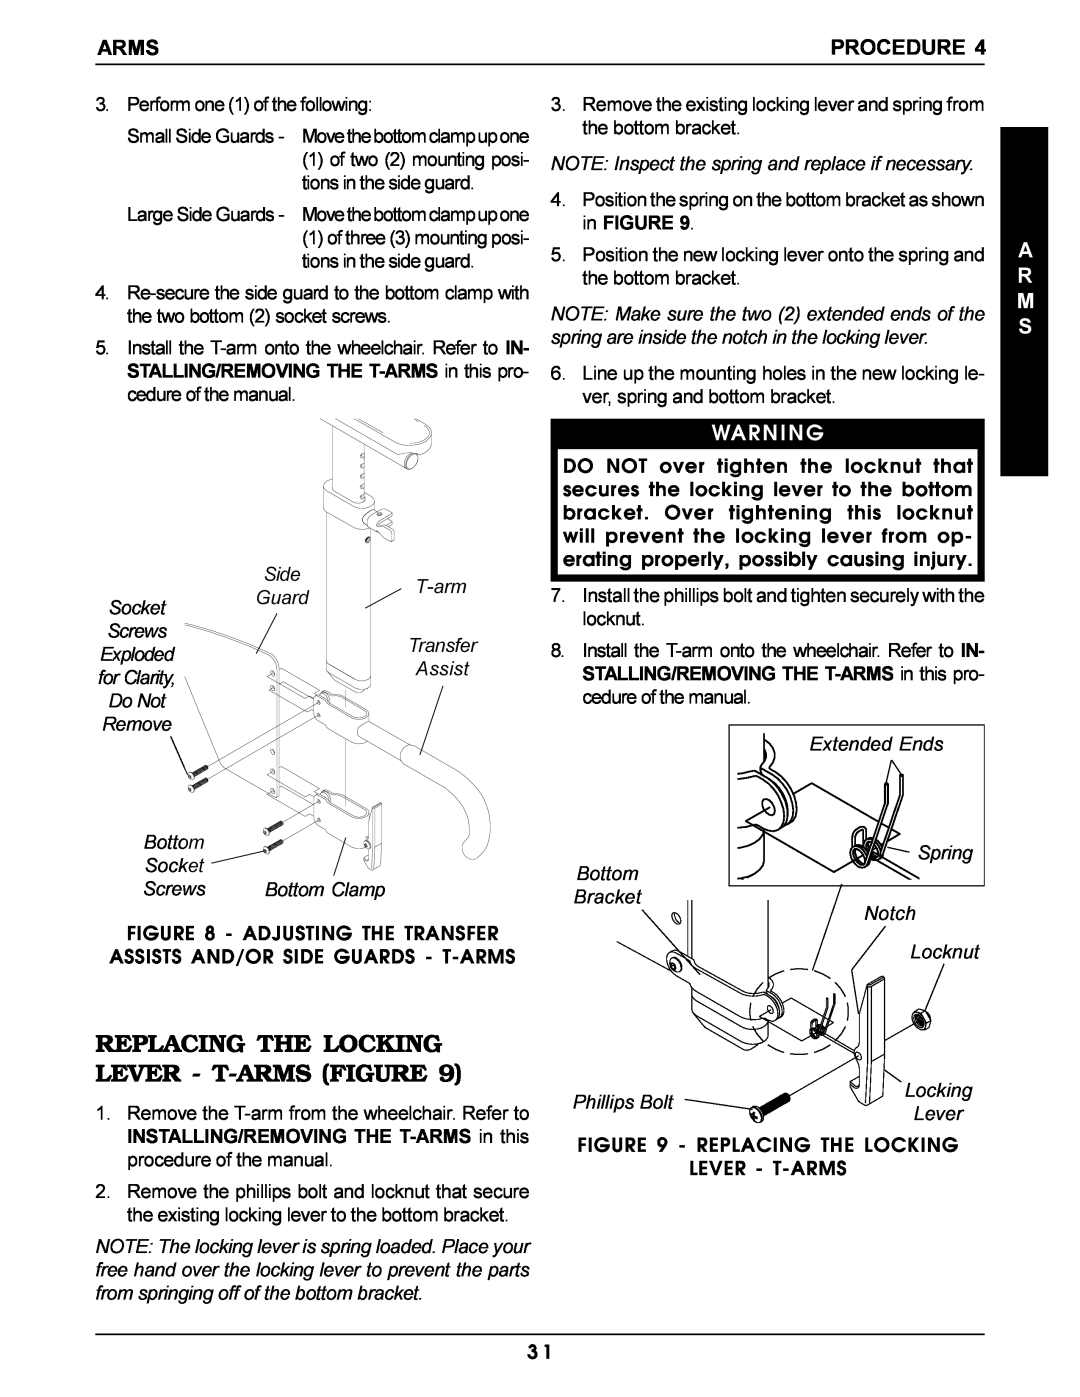 Invacare Pro Series manual Replacing The Locking Lever - T-Arms Figure, INSTALLING/REMOVING THE T-ARMS in this, A R M S 